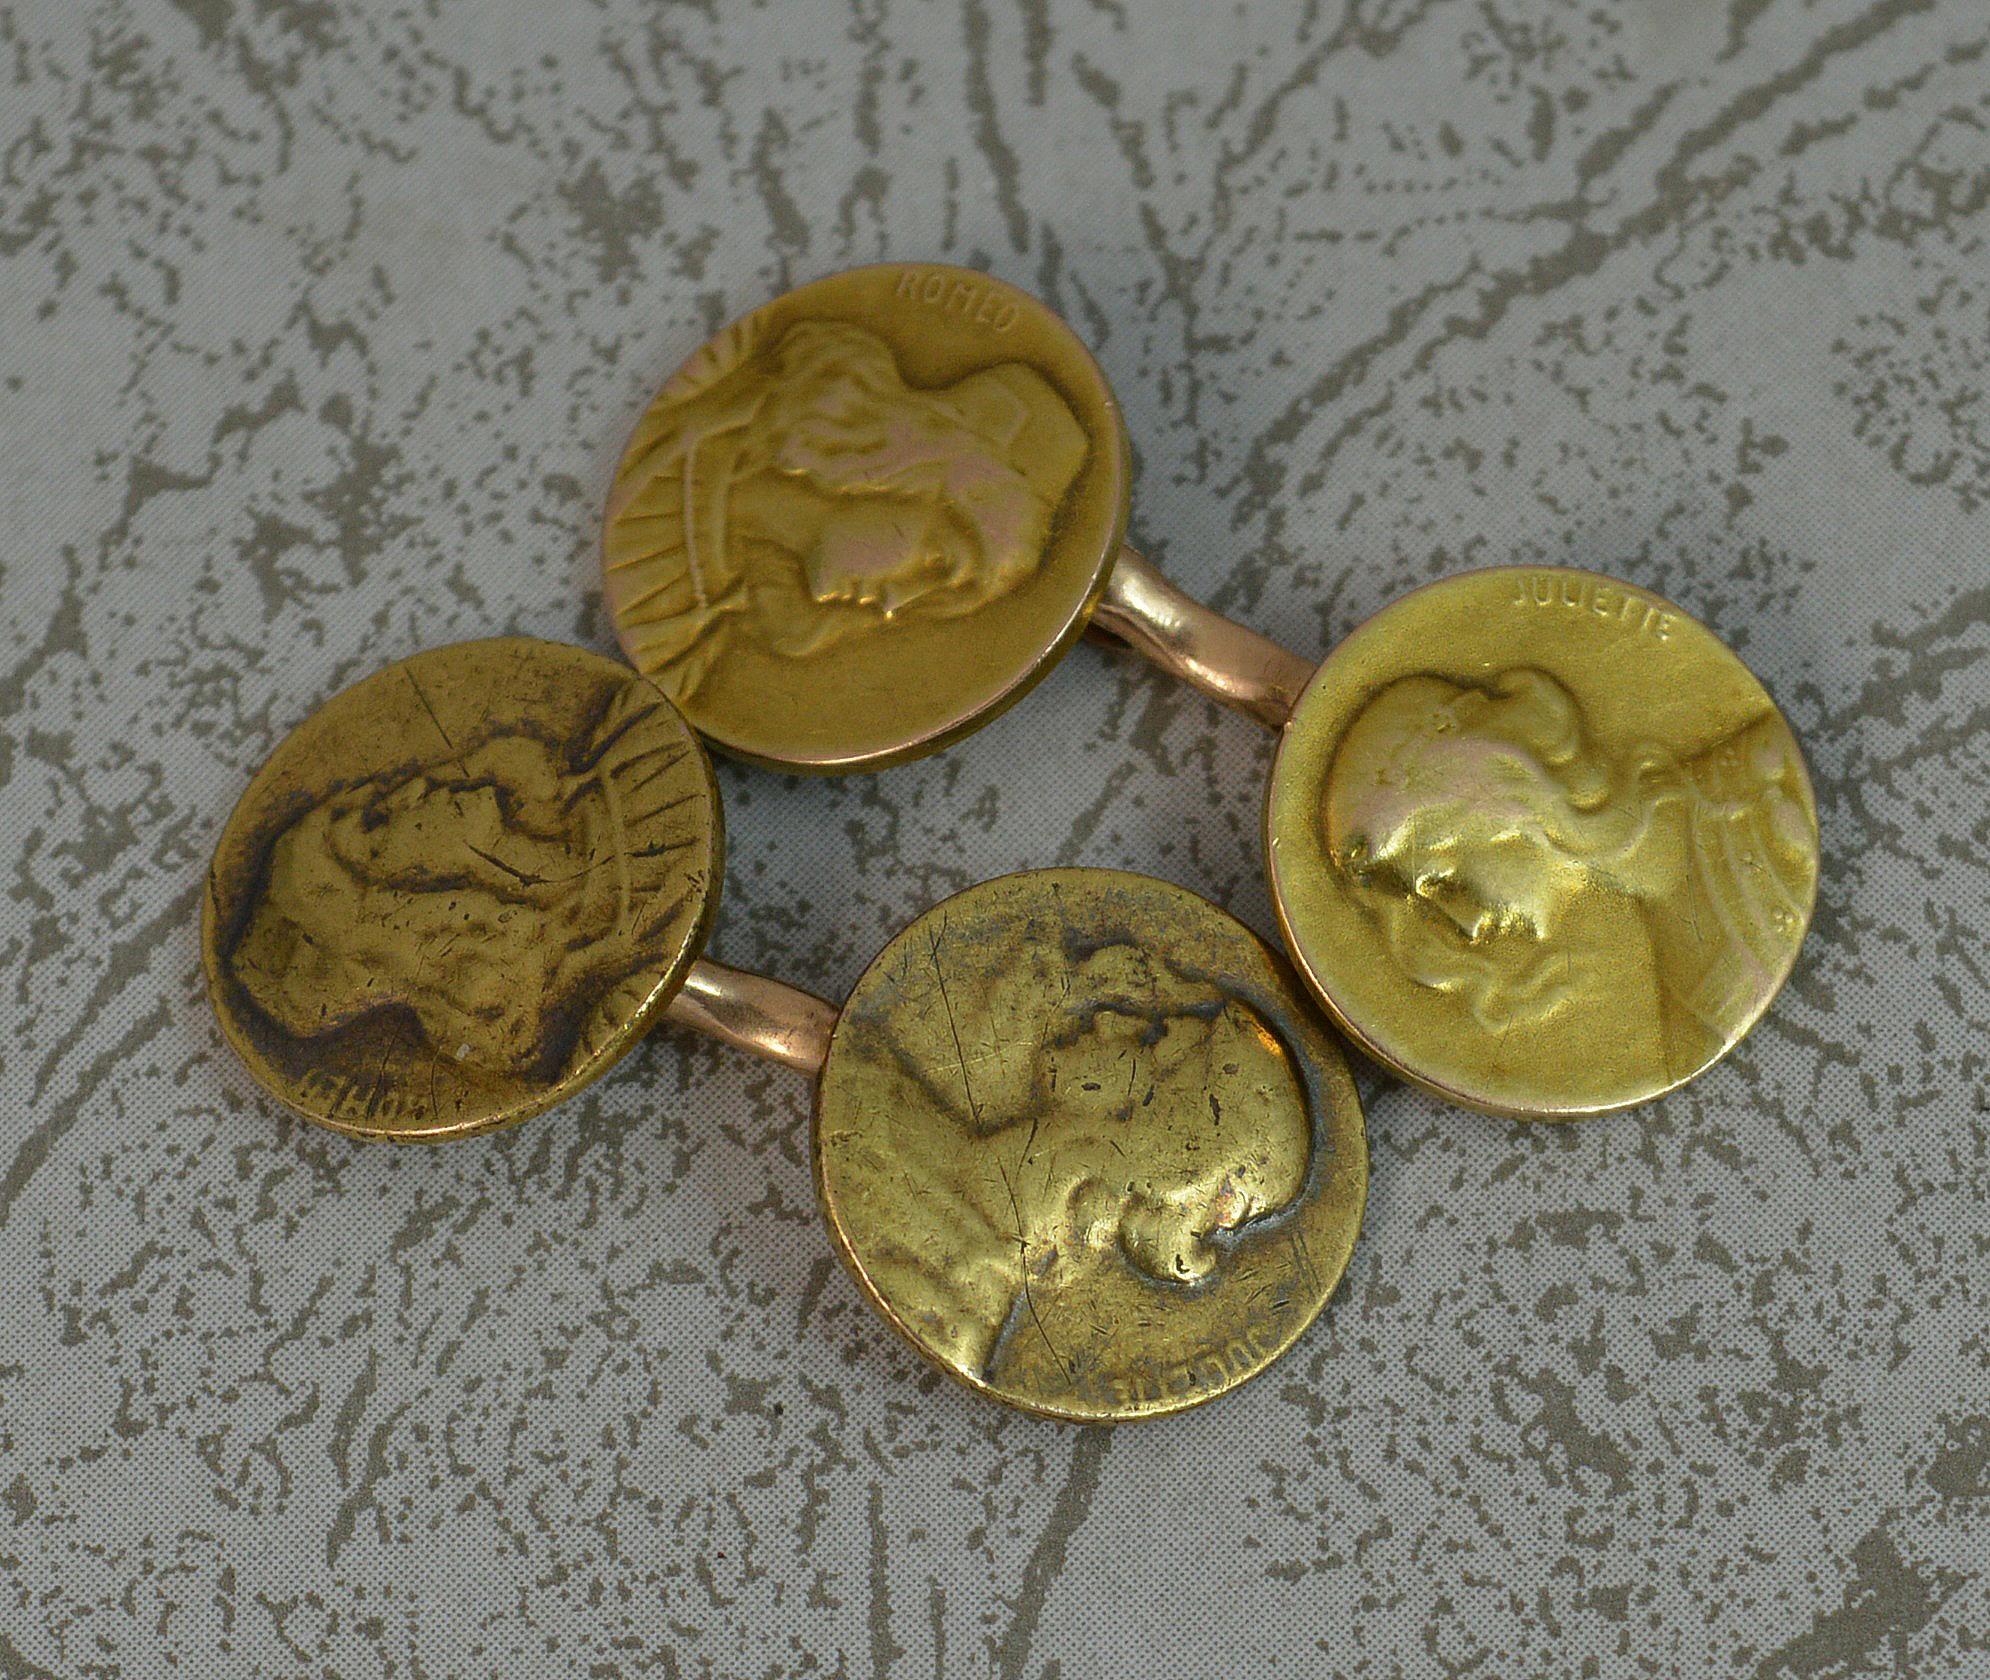 A highly unusual and rare pair of cufflinks.
Solid 14 carat yellow gold example.
Formed as circular discs with images depicting Romeo and Juliet to each half.
Circa 1905.

CONDITION ; Very good for age. Crisp links. Busts with light general wear and